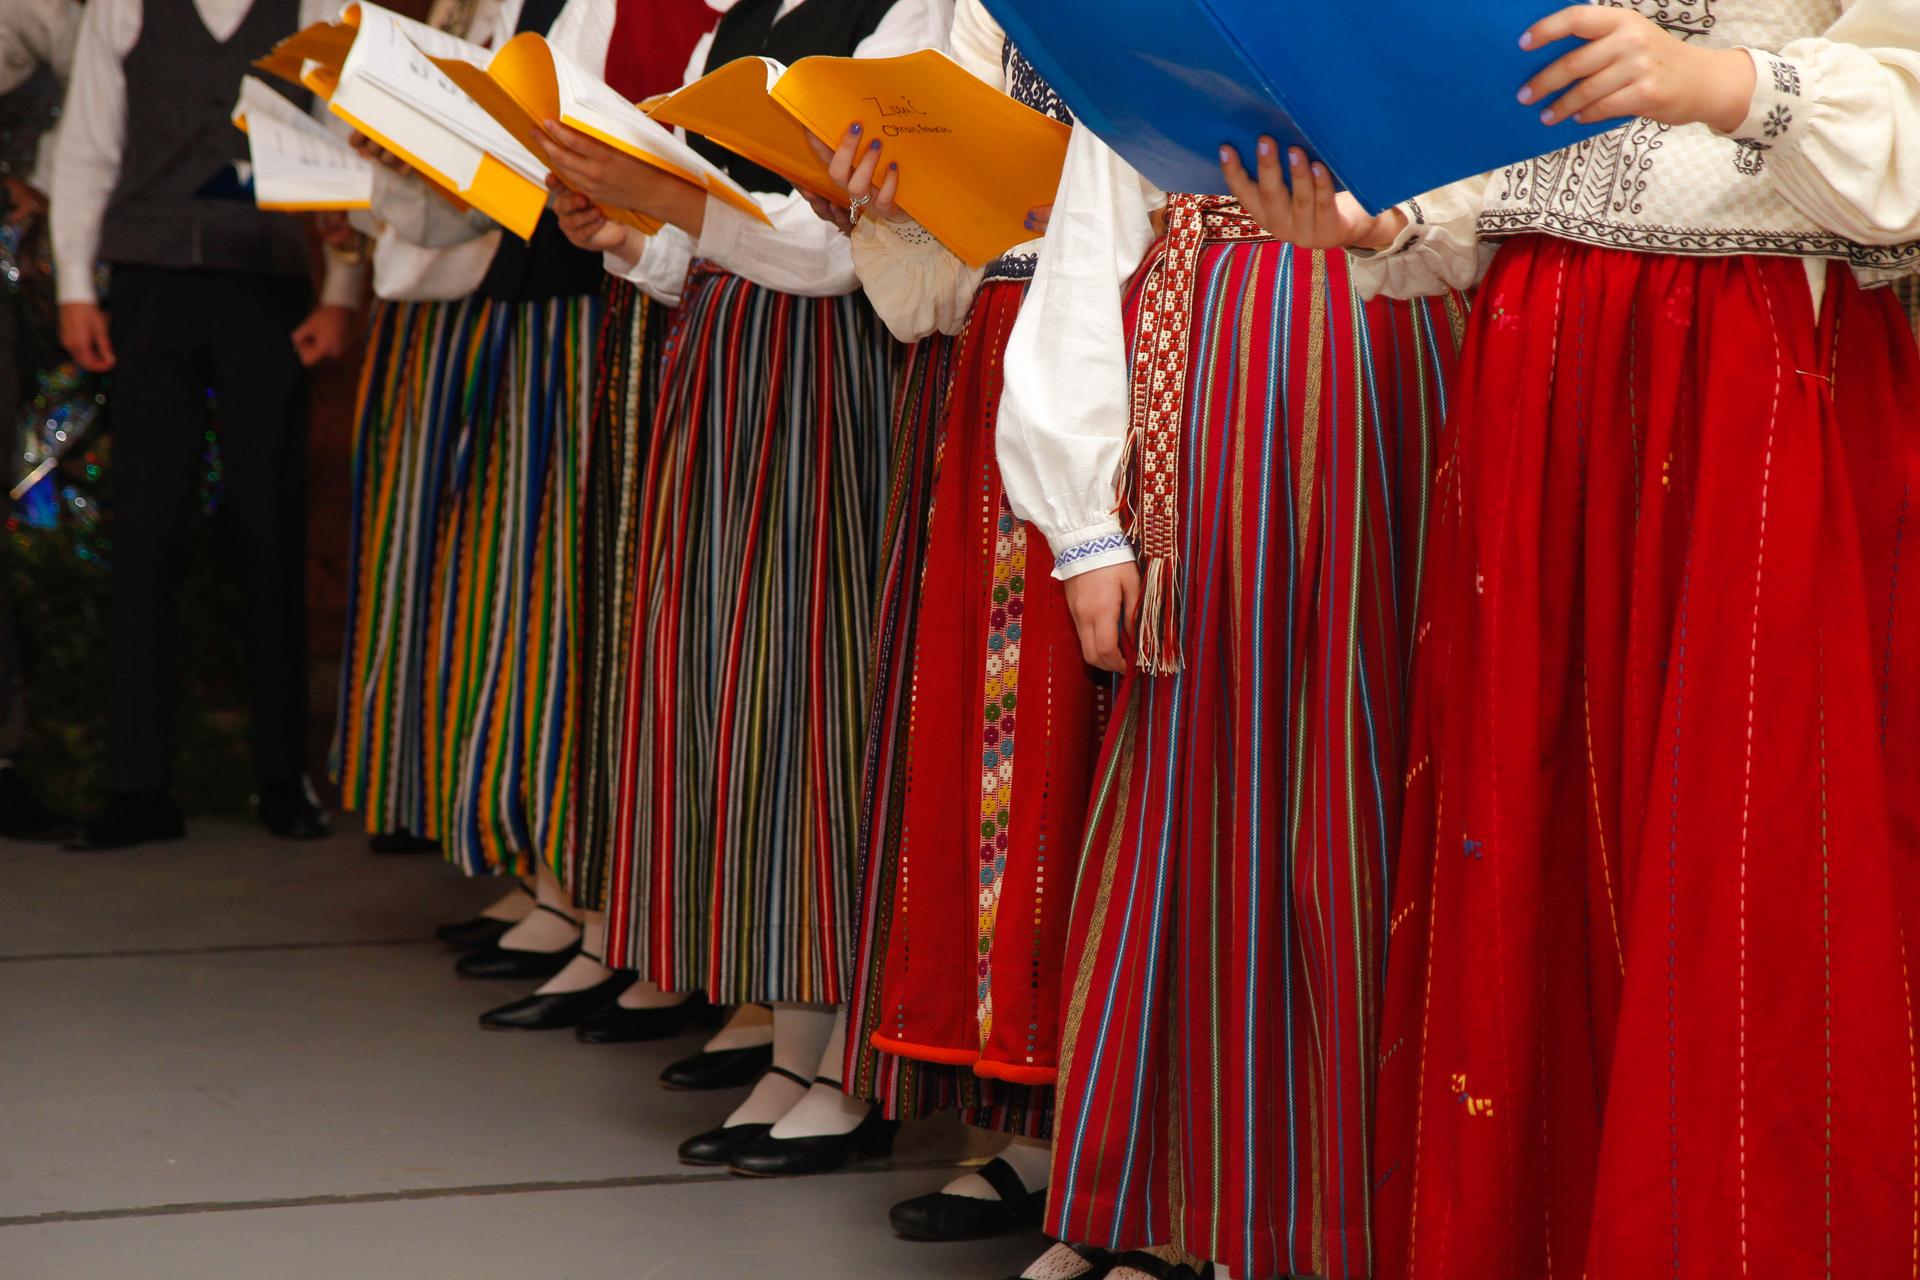 A row of multi-colored woolen skirts